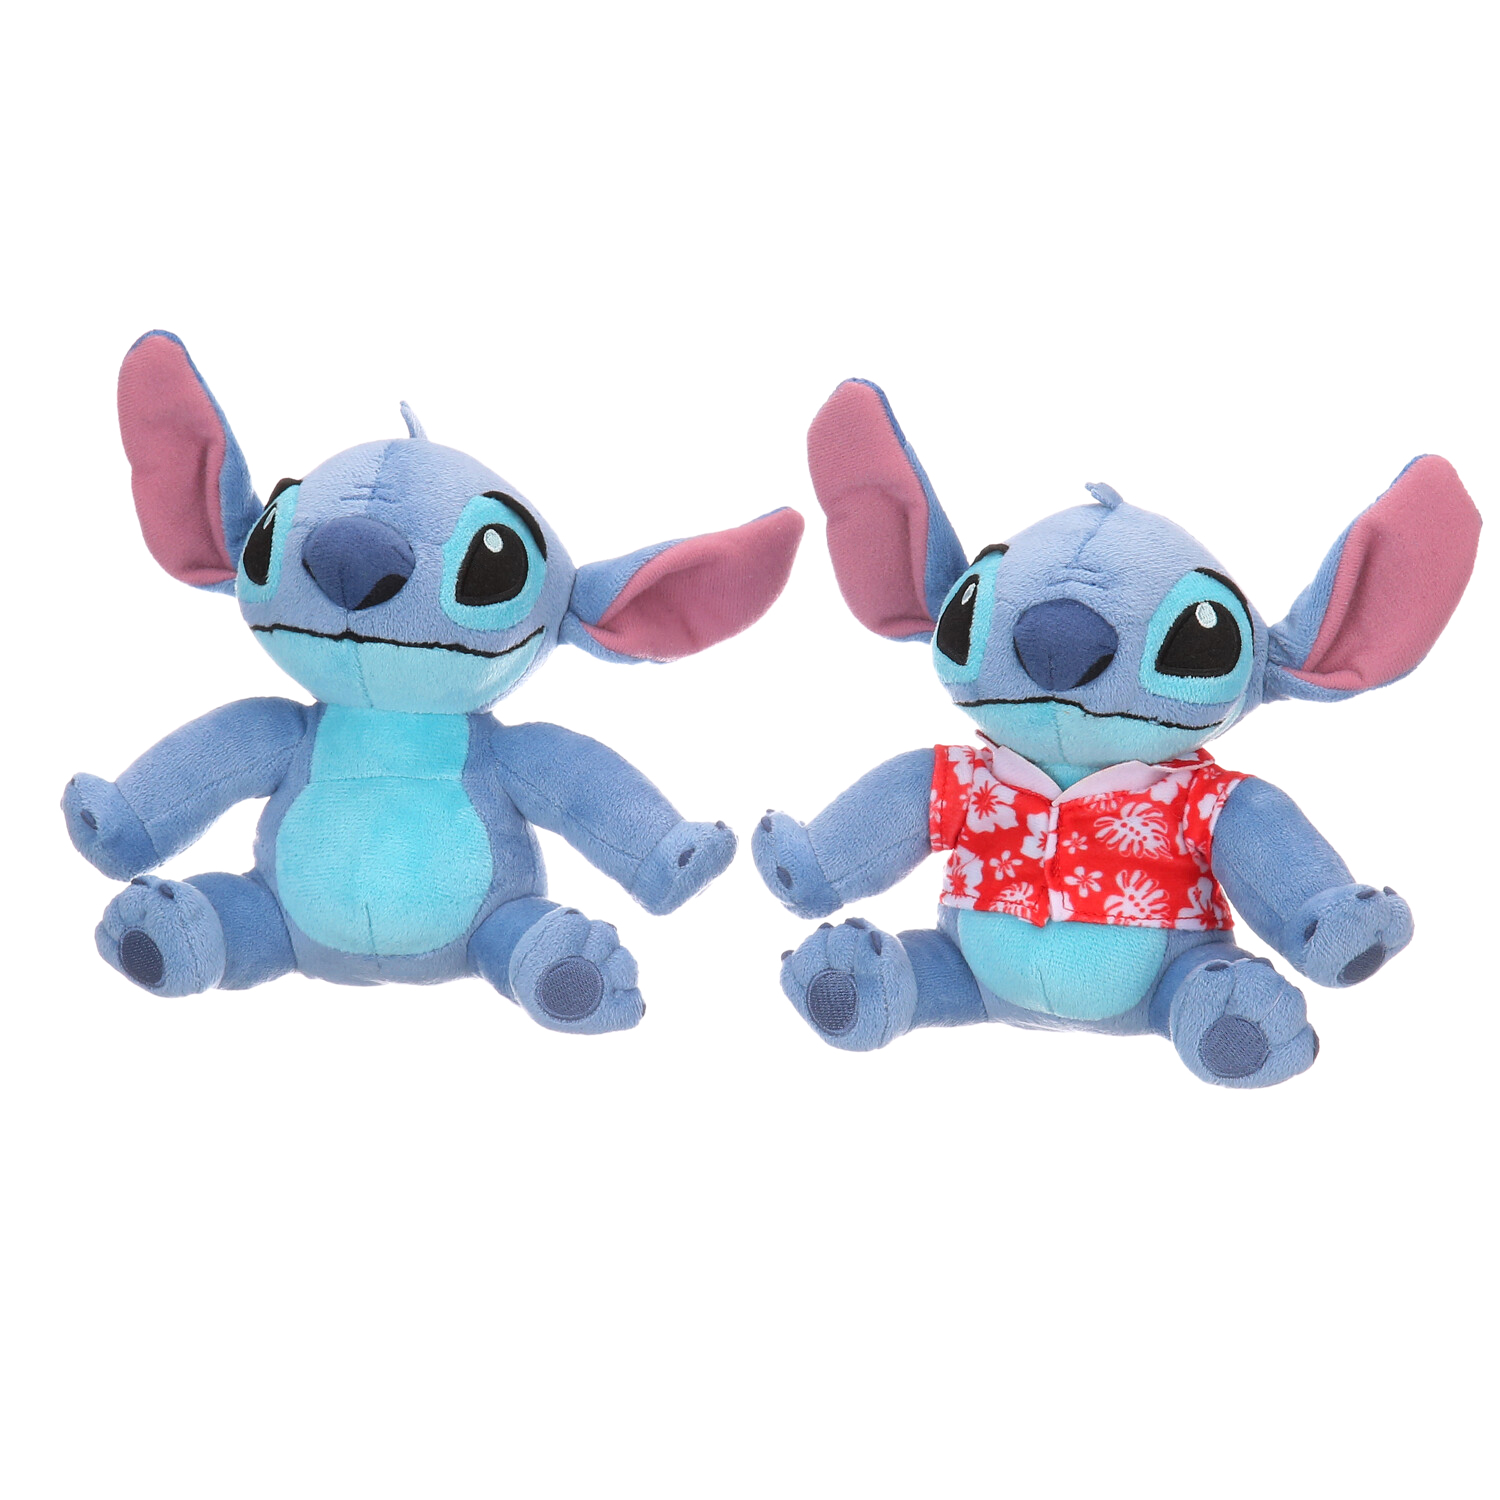 Disney Lilo & Stitch Bean Plush, Officially Licensed Kids Toys for Ages 2  Up by Just Play